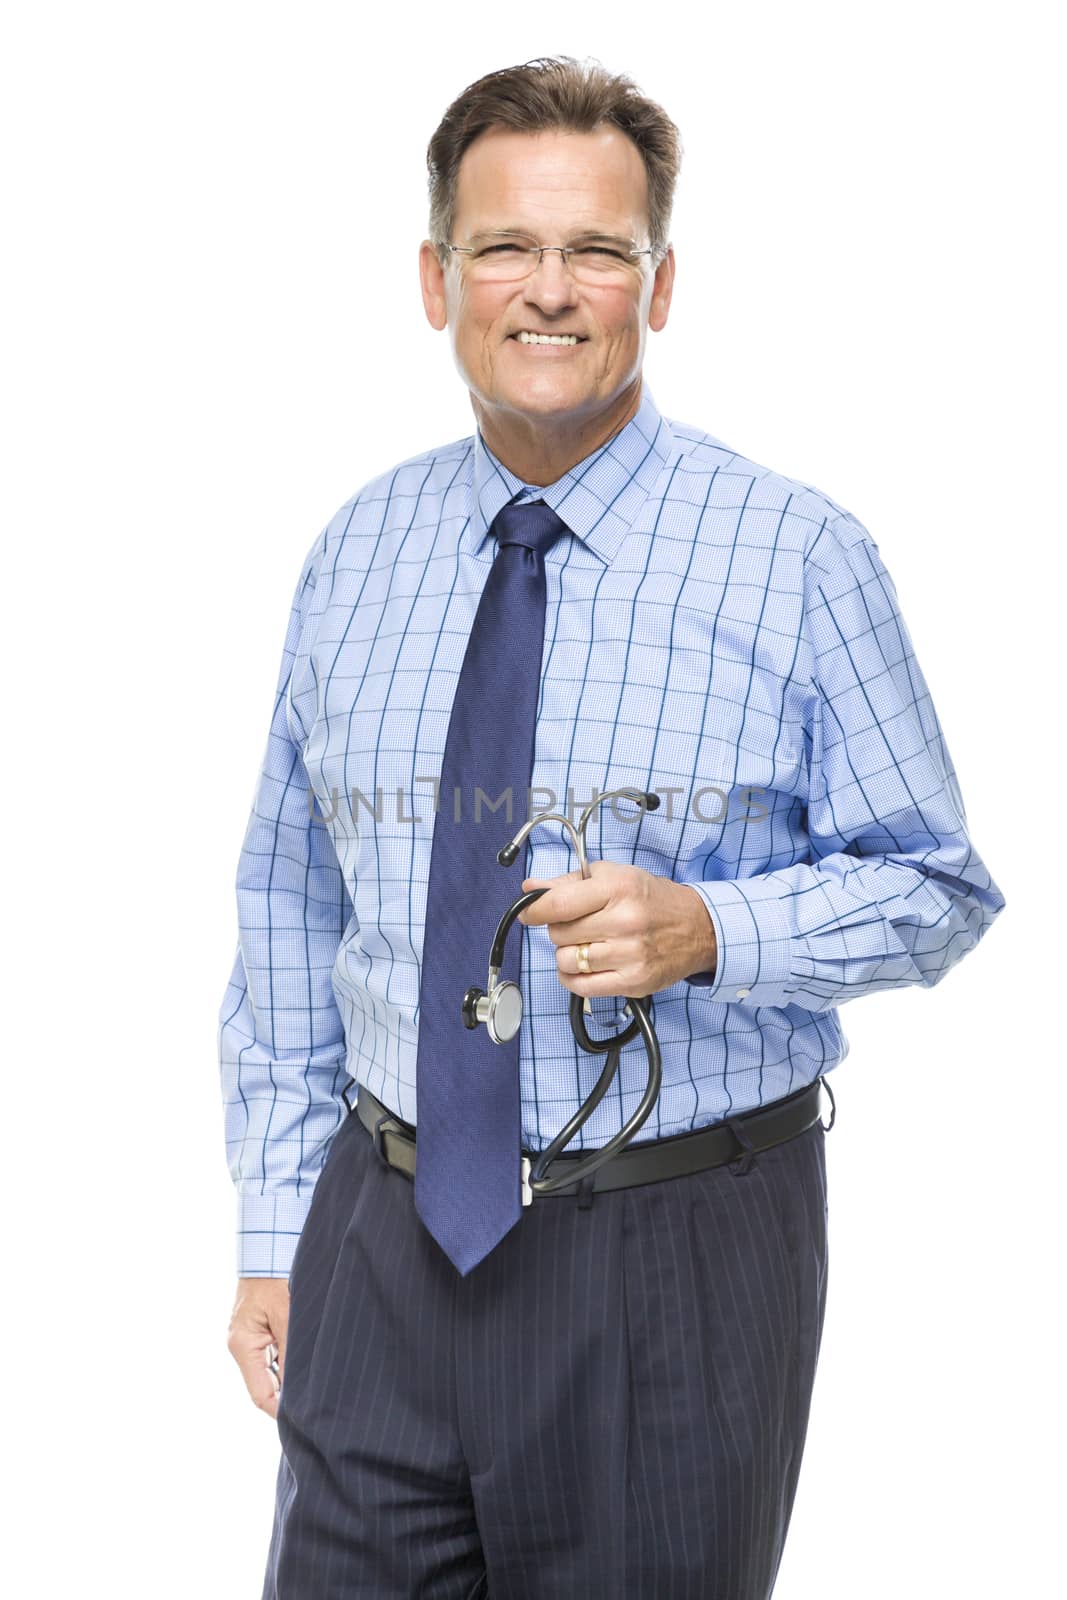 Handsome Smiling Male Doctor with Stethoscope Isolated on a White Background.